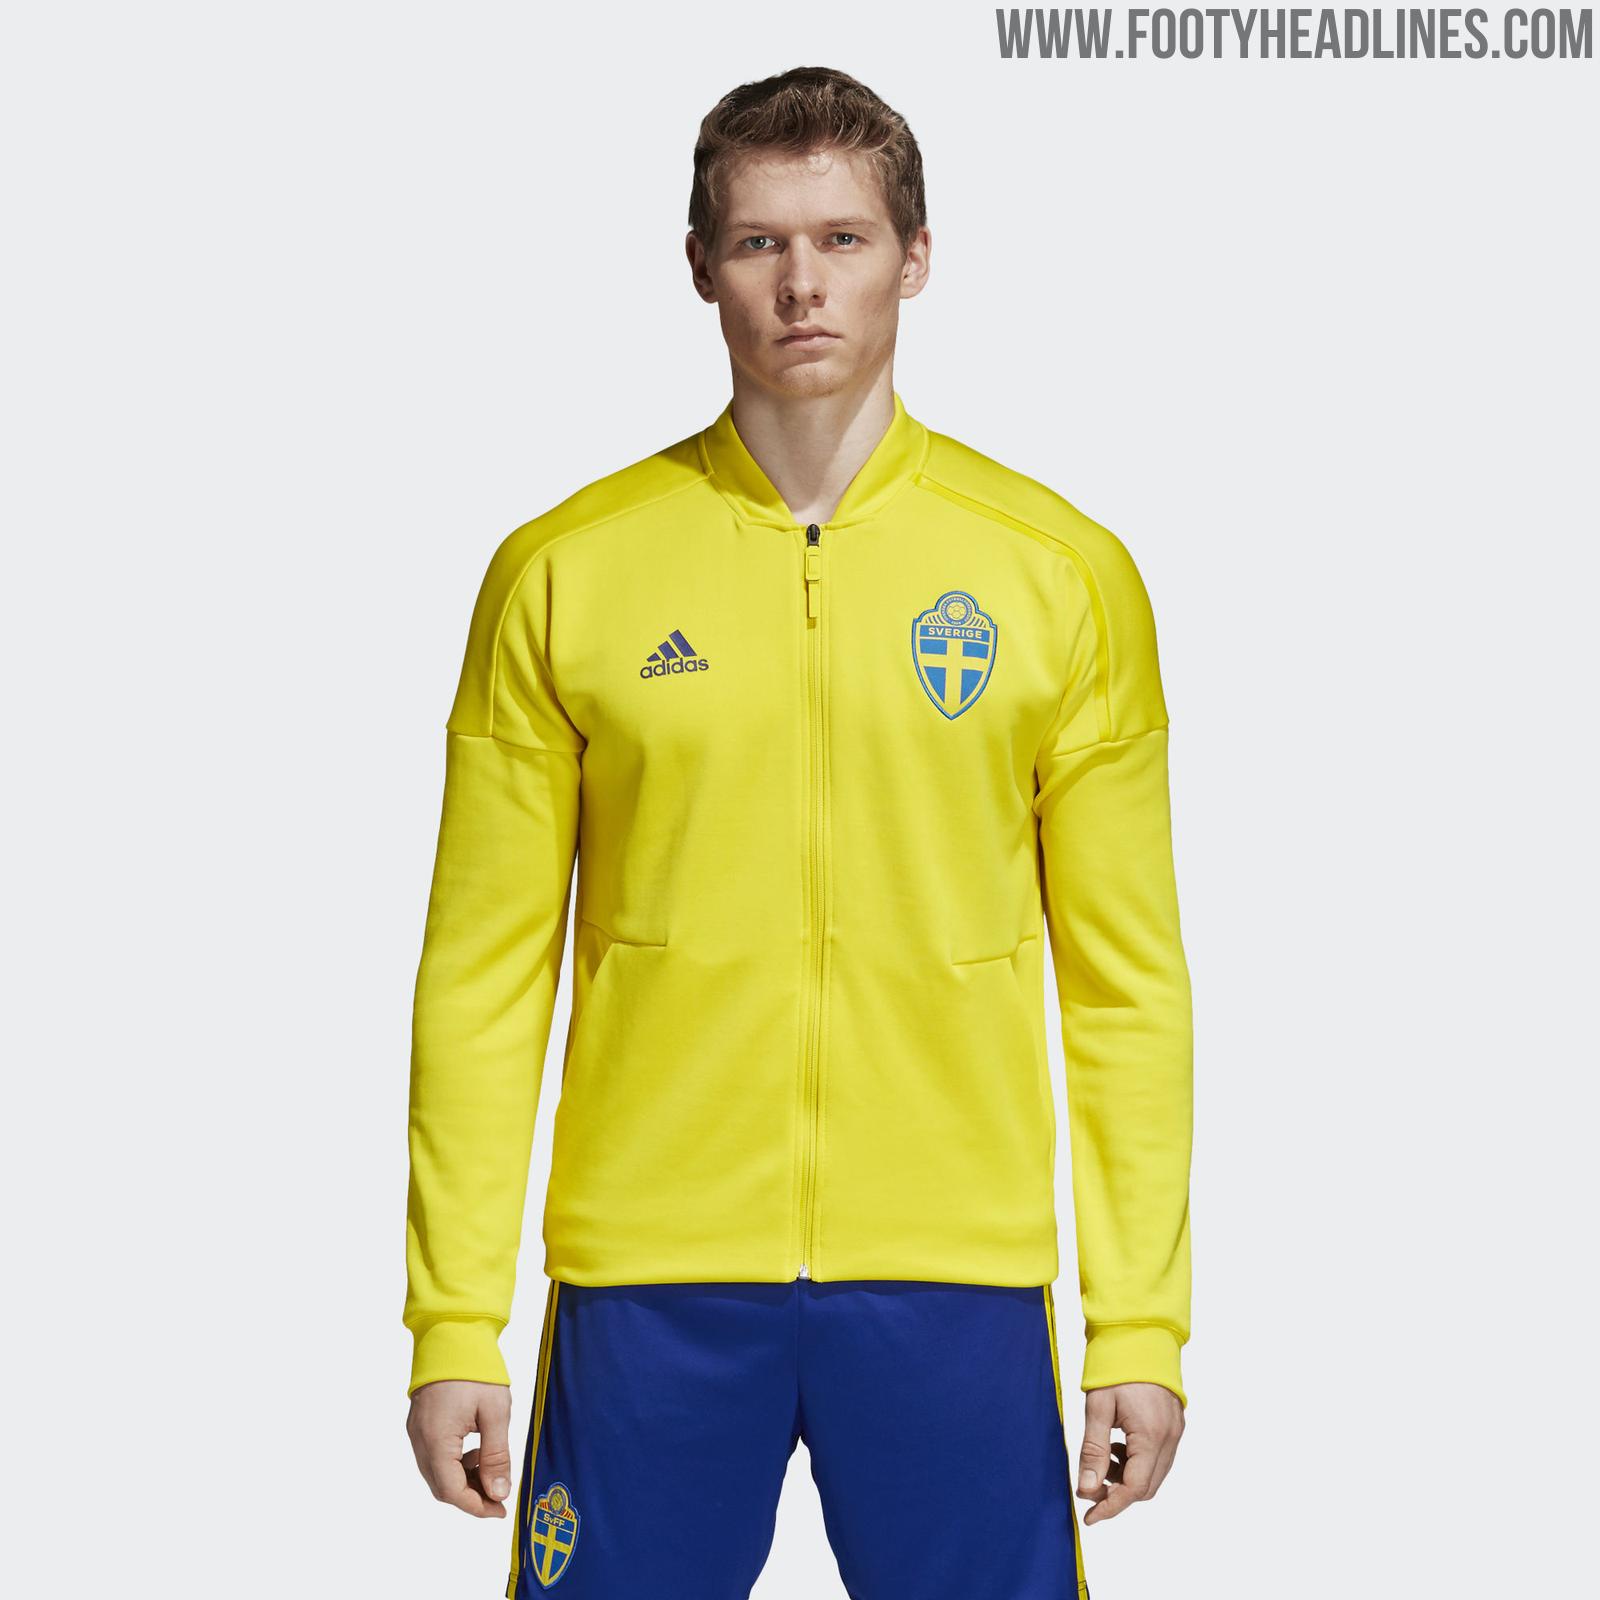 Adidas Germany, Spain, Argentina, Japan, Mexico, Colombia, Sweden and ...